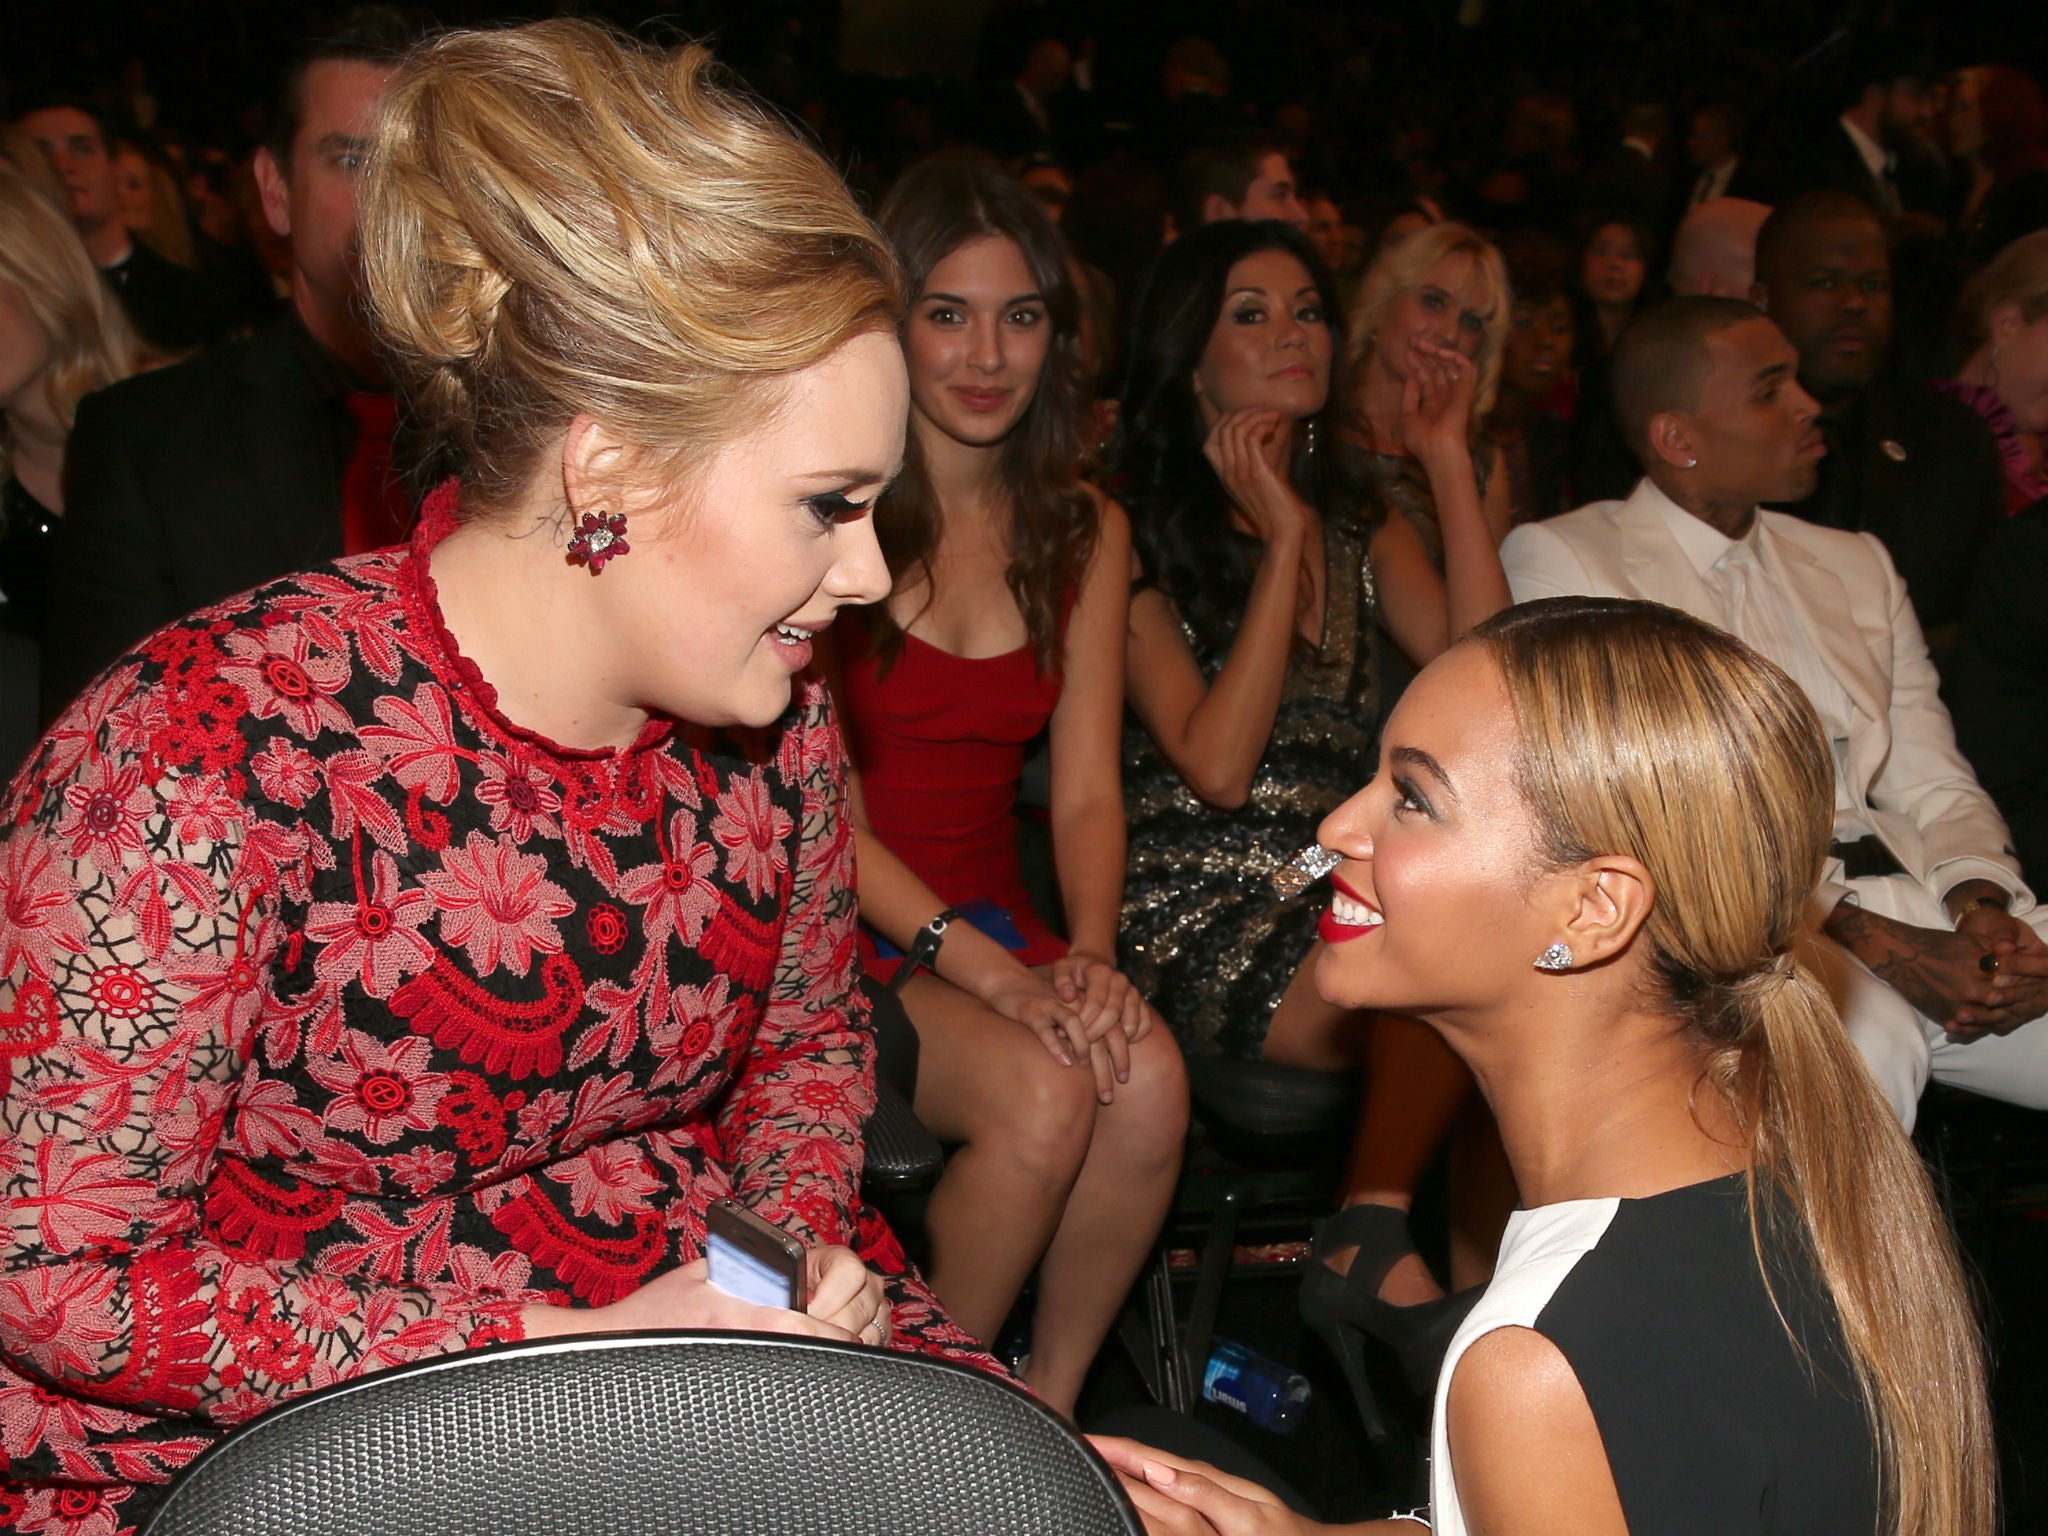 Adele and Beyonce are both singing sensations in their own rights, but very different